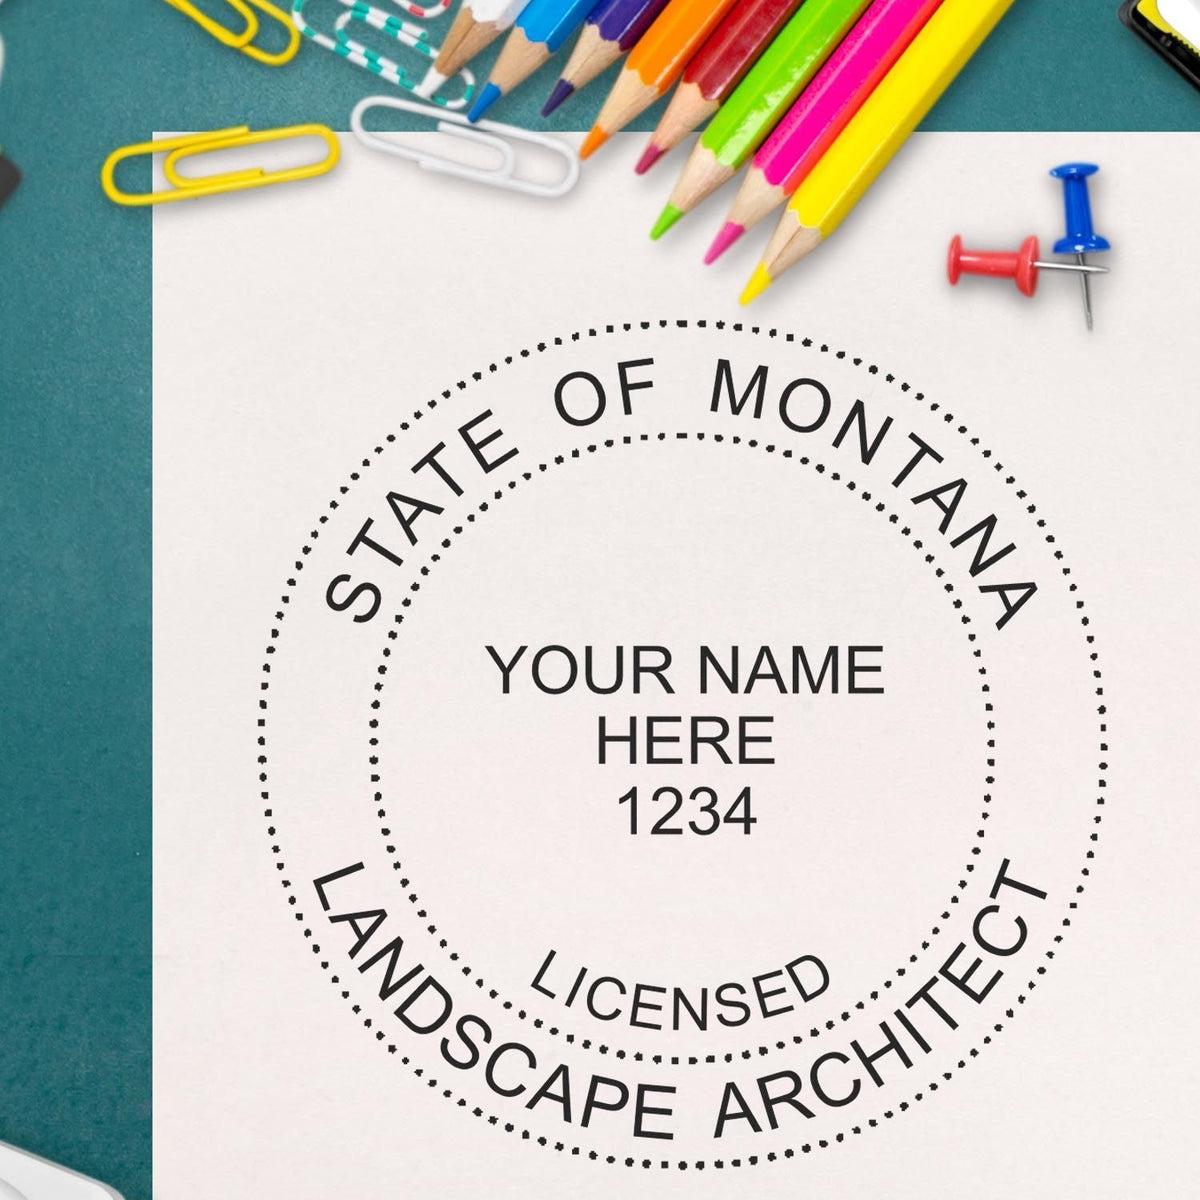 A lifestyle photo showing a stamped image of the Montana Landscape Architectural Seal Stamp on a piece of paper